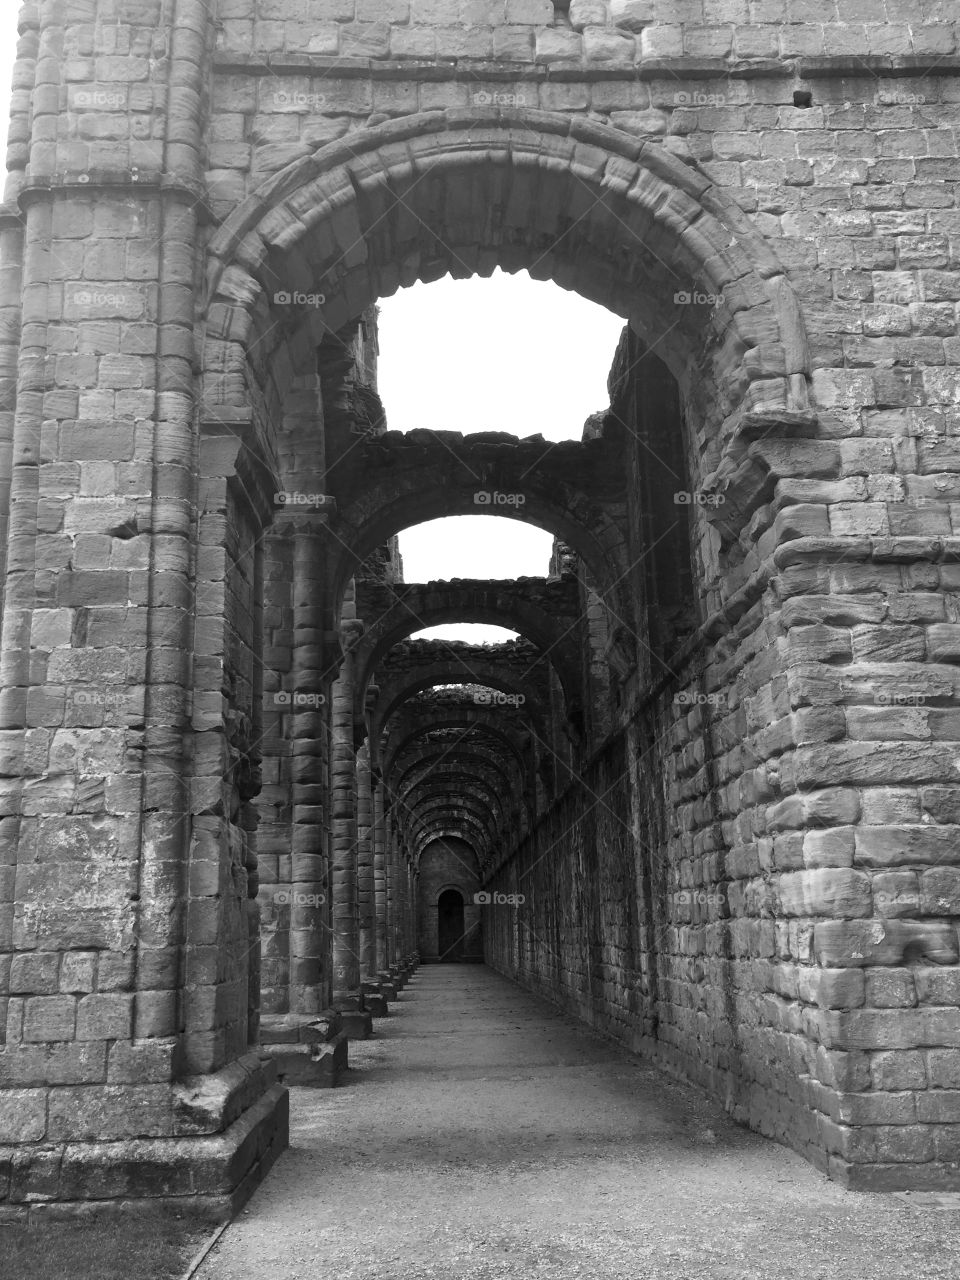 Abbey's arches